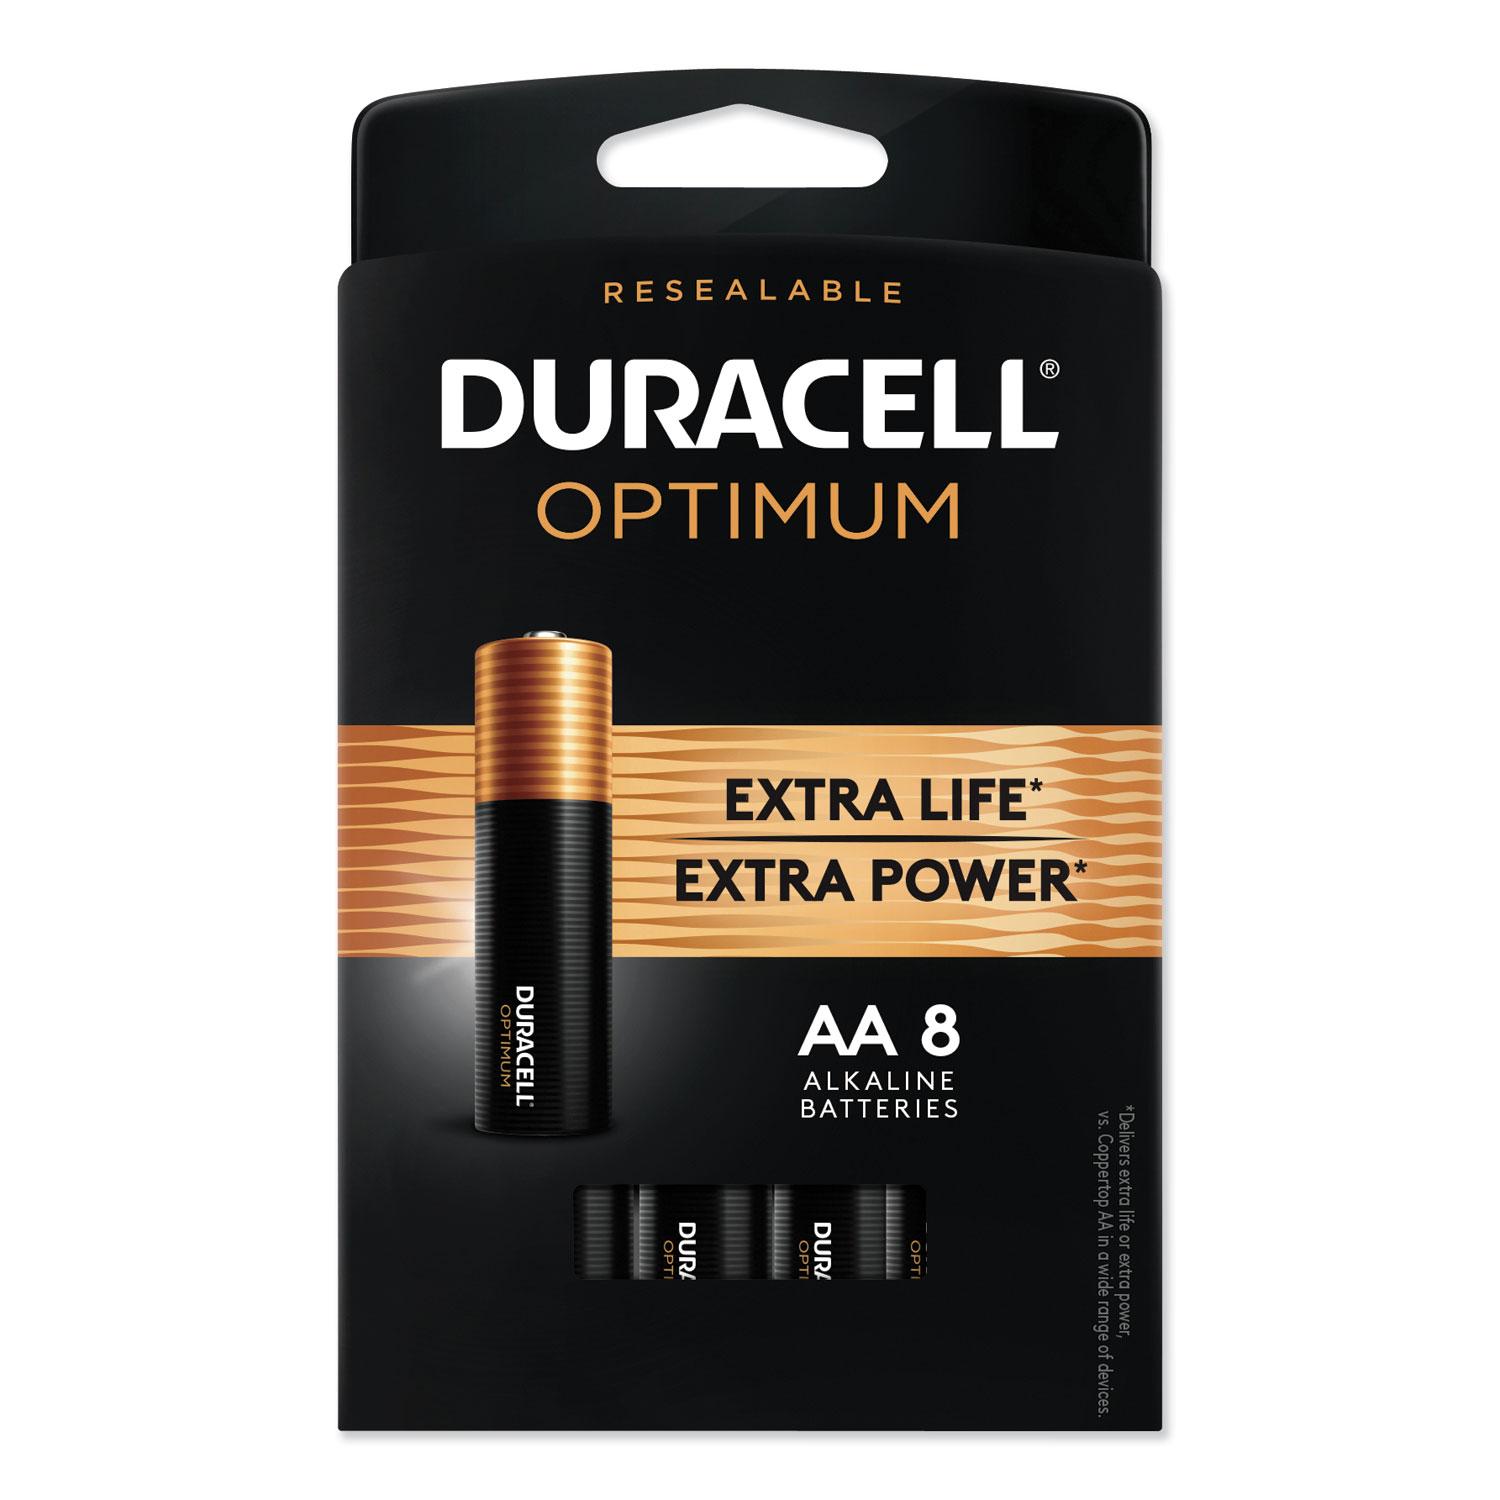 8 Duracell Optimum AA or AAA Batteries for $3.72